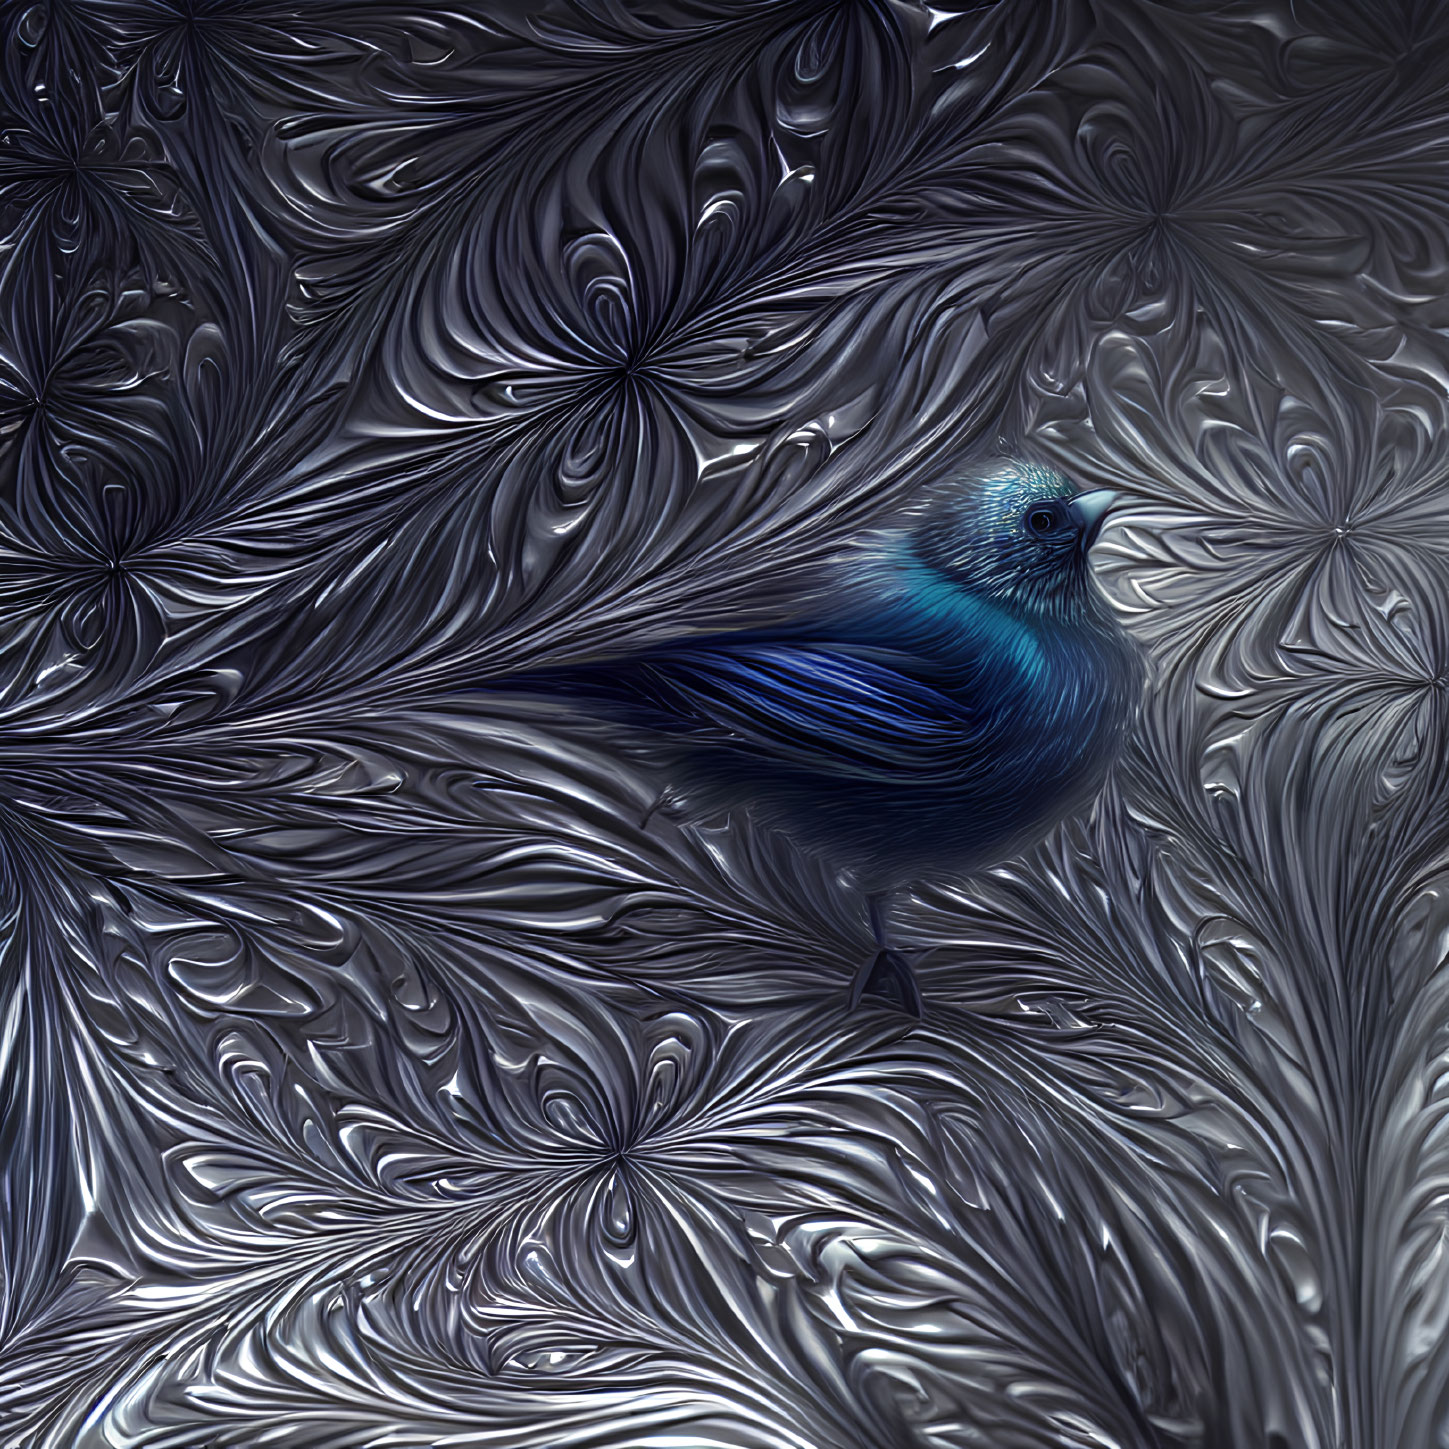 Blue bird perched on textured background with dark swirls and feather-like patterns